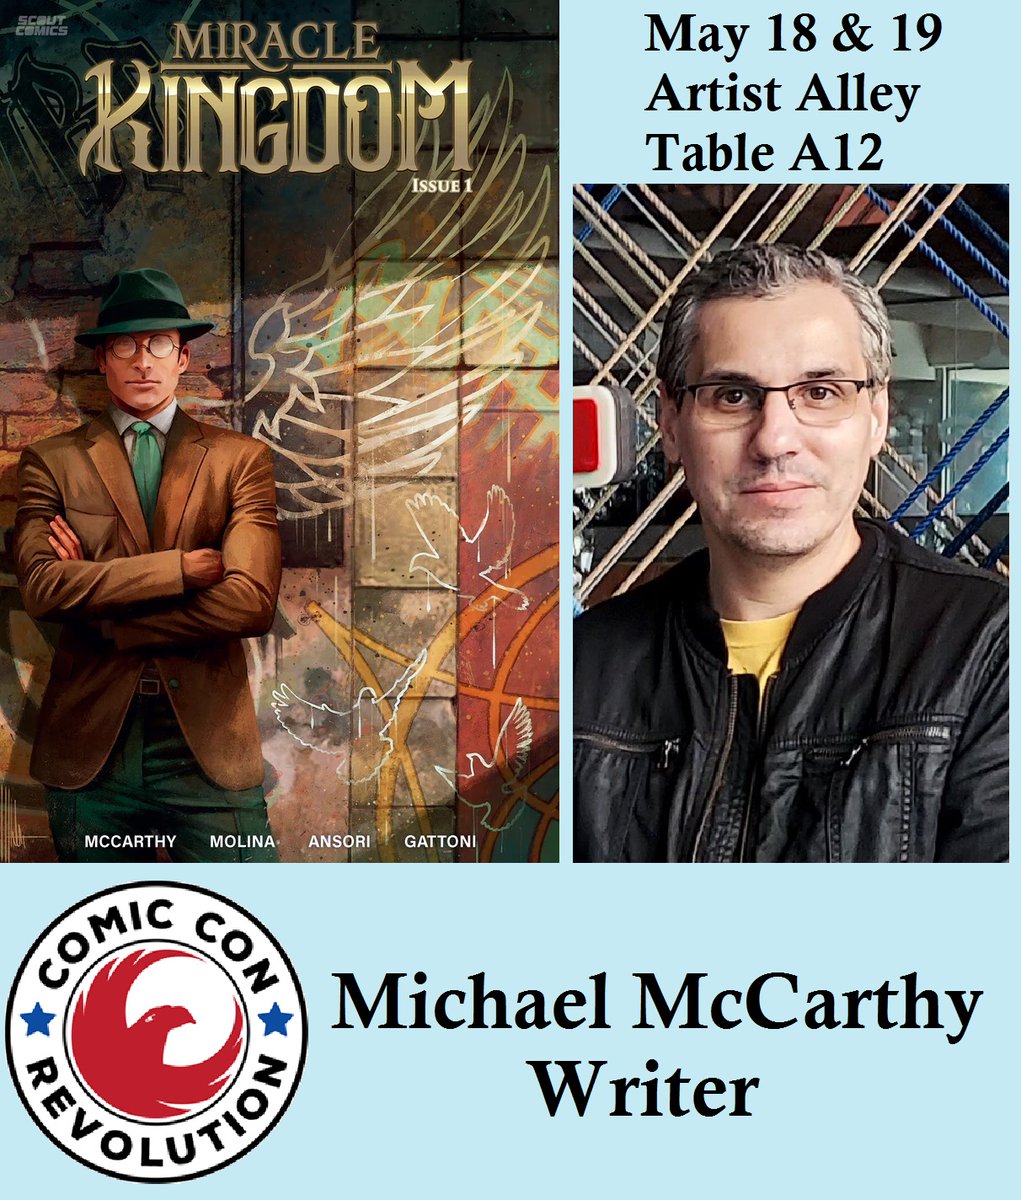 Don't forget ComicCon Revolution is coming to Ontario, CA on May 18 & 19! The voice cast of X-Men '97 will be there as well as a ton of comic book creators (me included)! Find me at Artist Alley Table A-12